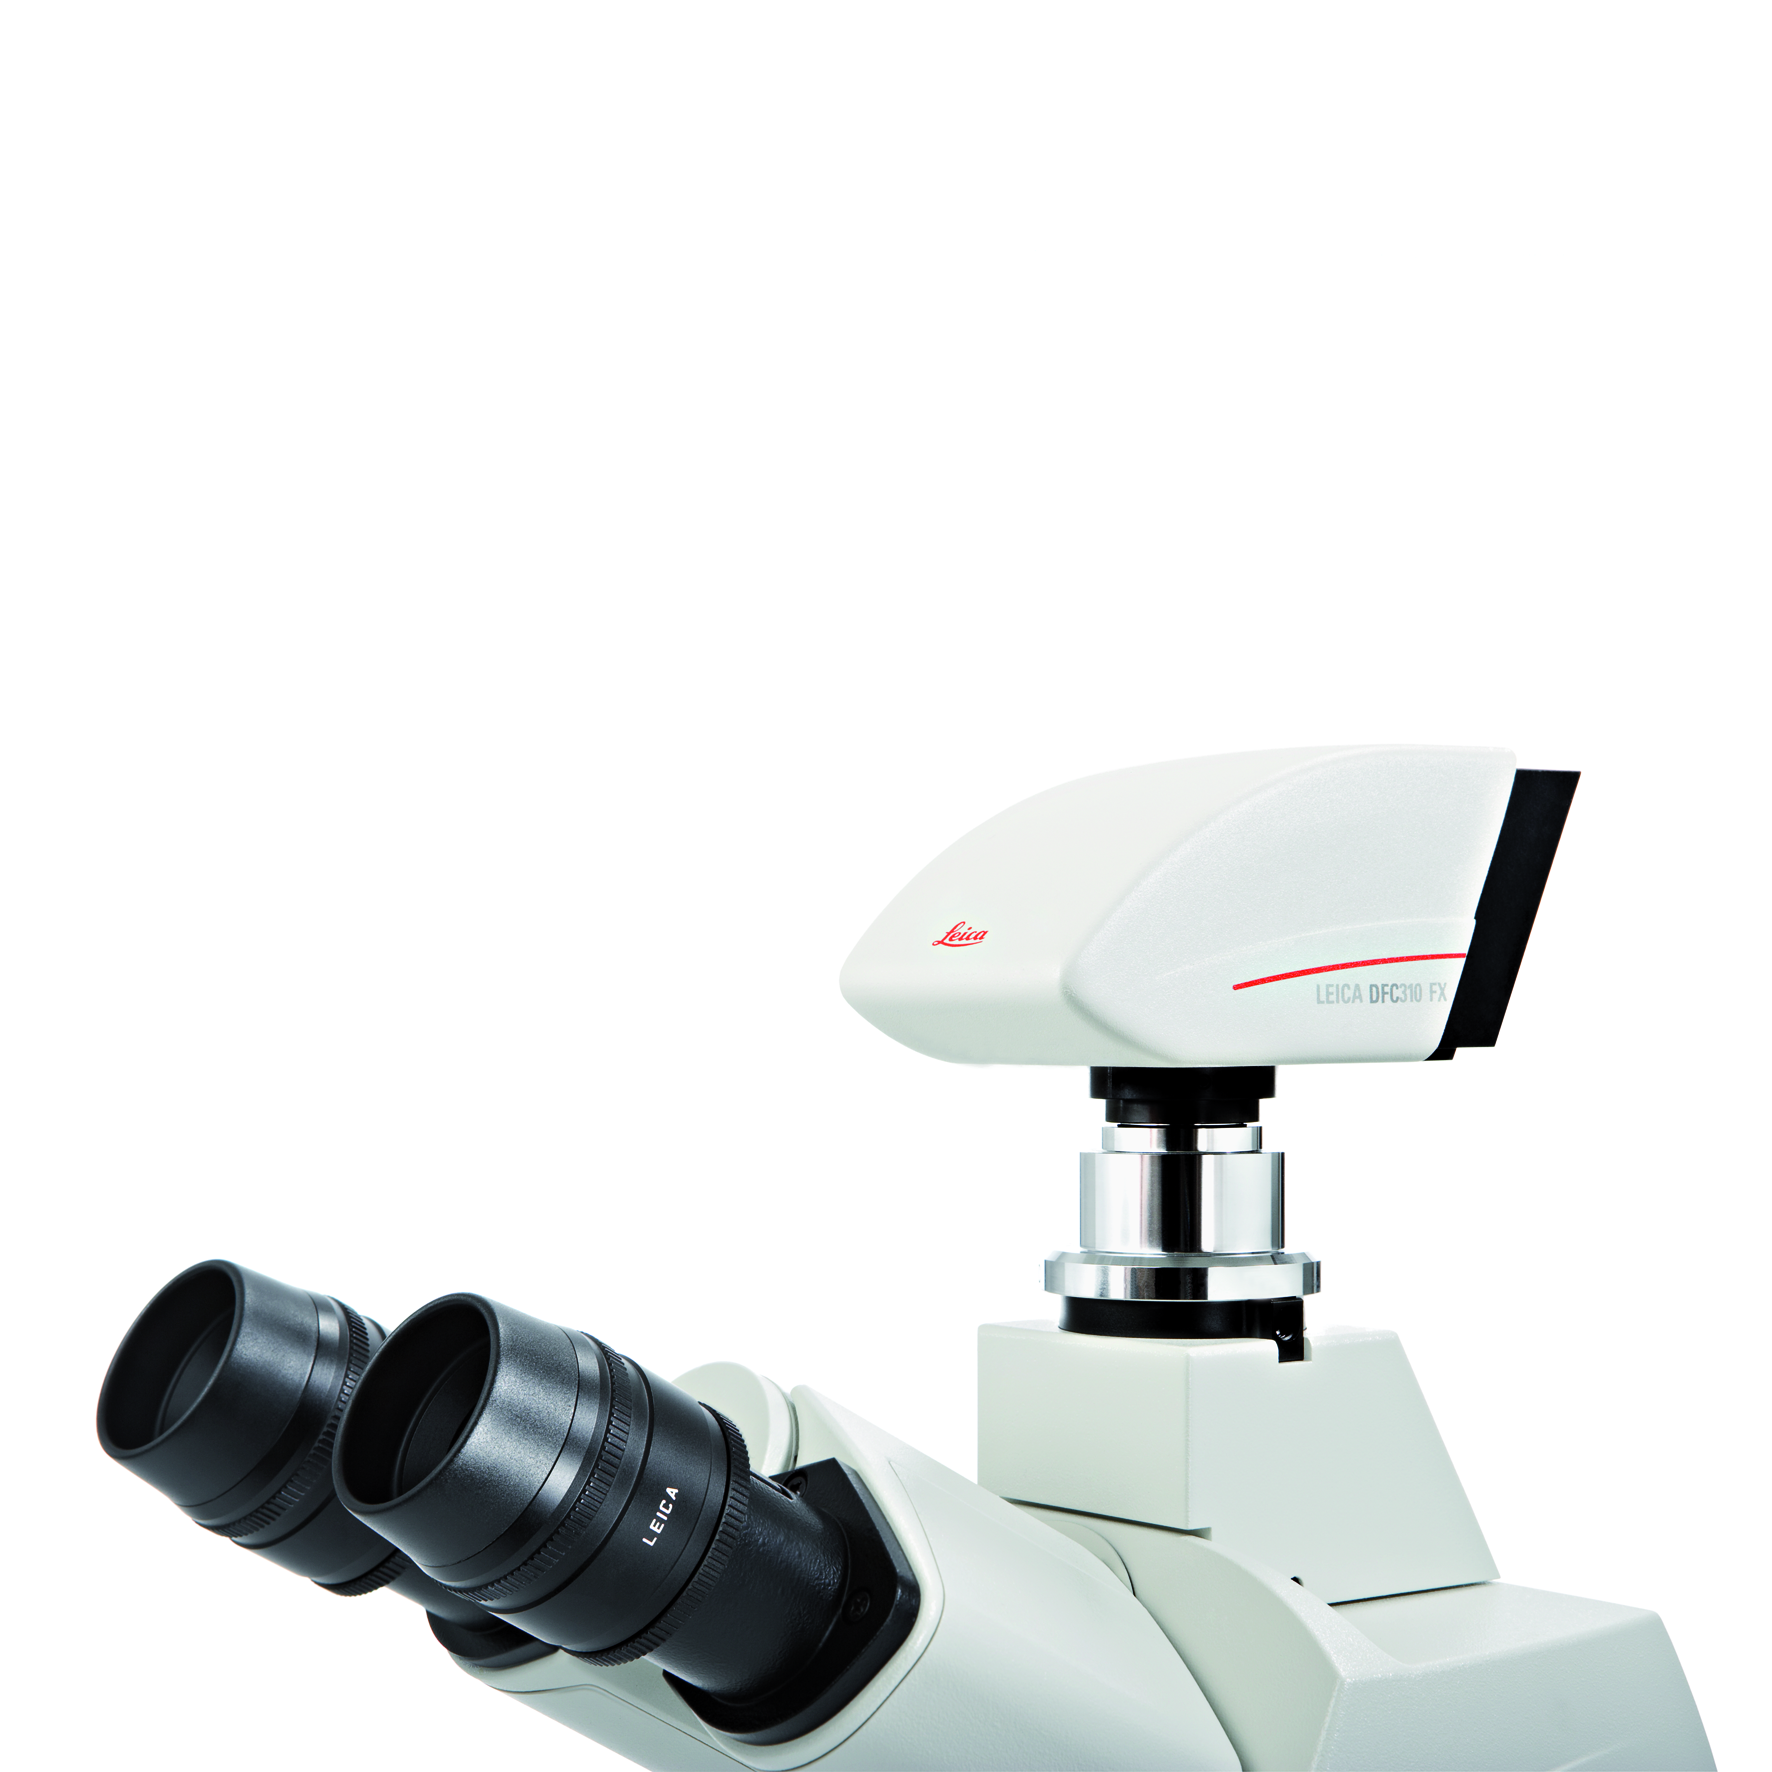 Documenting fast dynamic cellular processes is easy with the Leica DFC310 FX digital color camera.